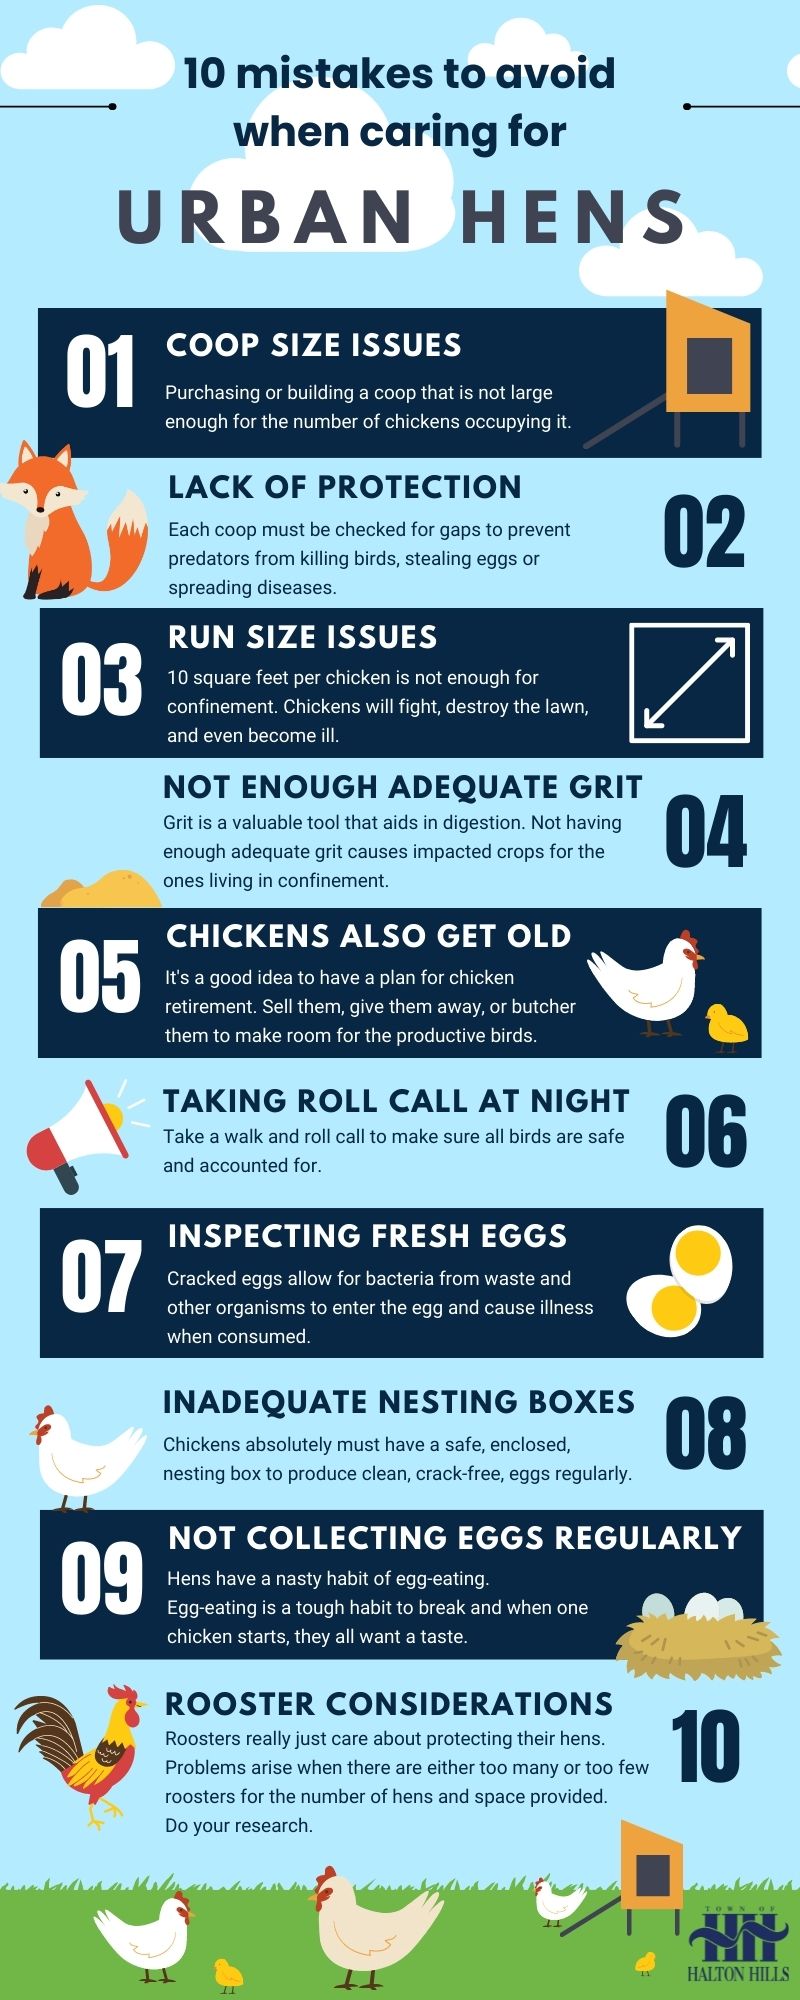 10 mistakes to avoid when caring for Urban Hens